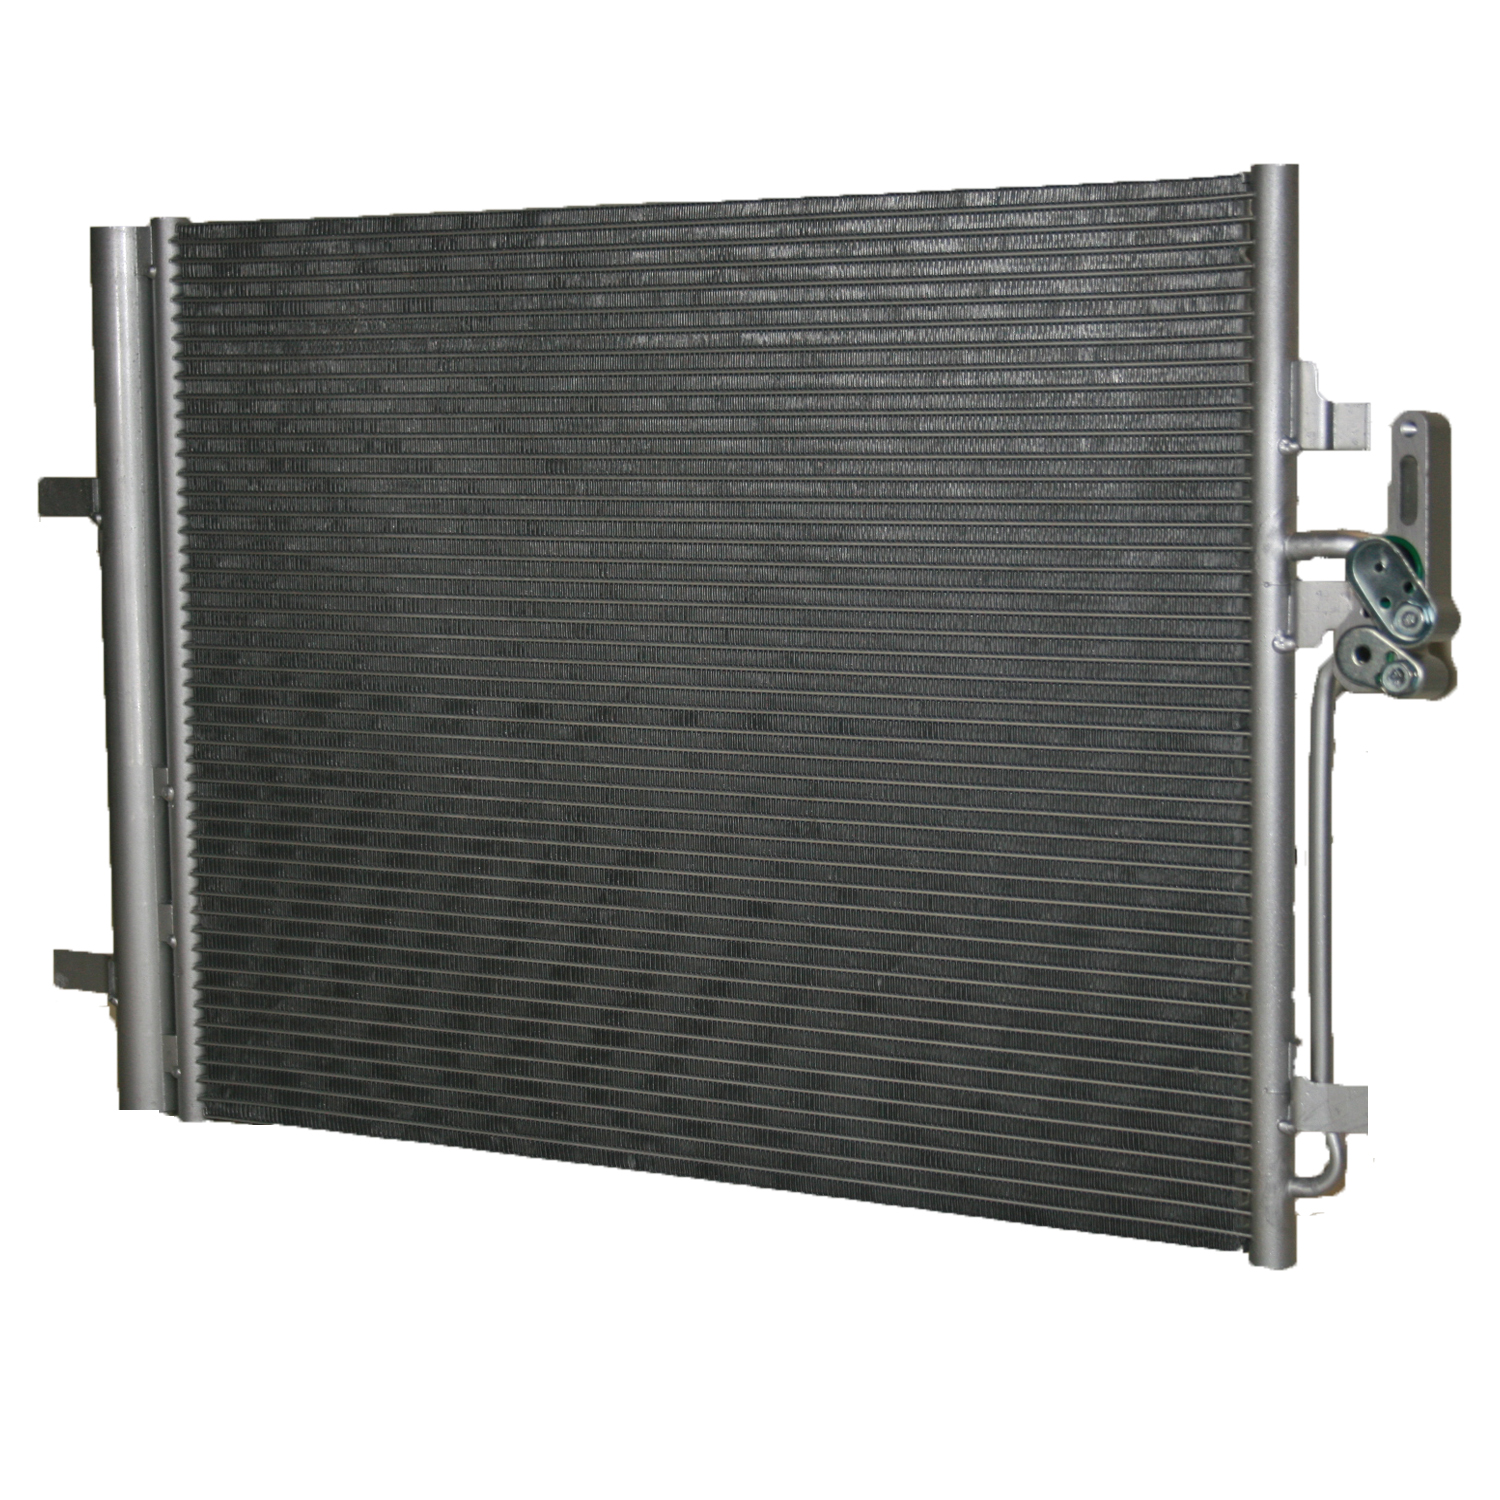 TCW Condenser 44-3733 New Product Image field_60b6a13a6e67c